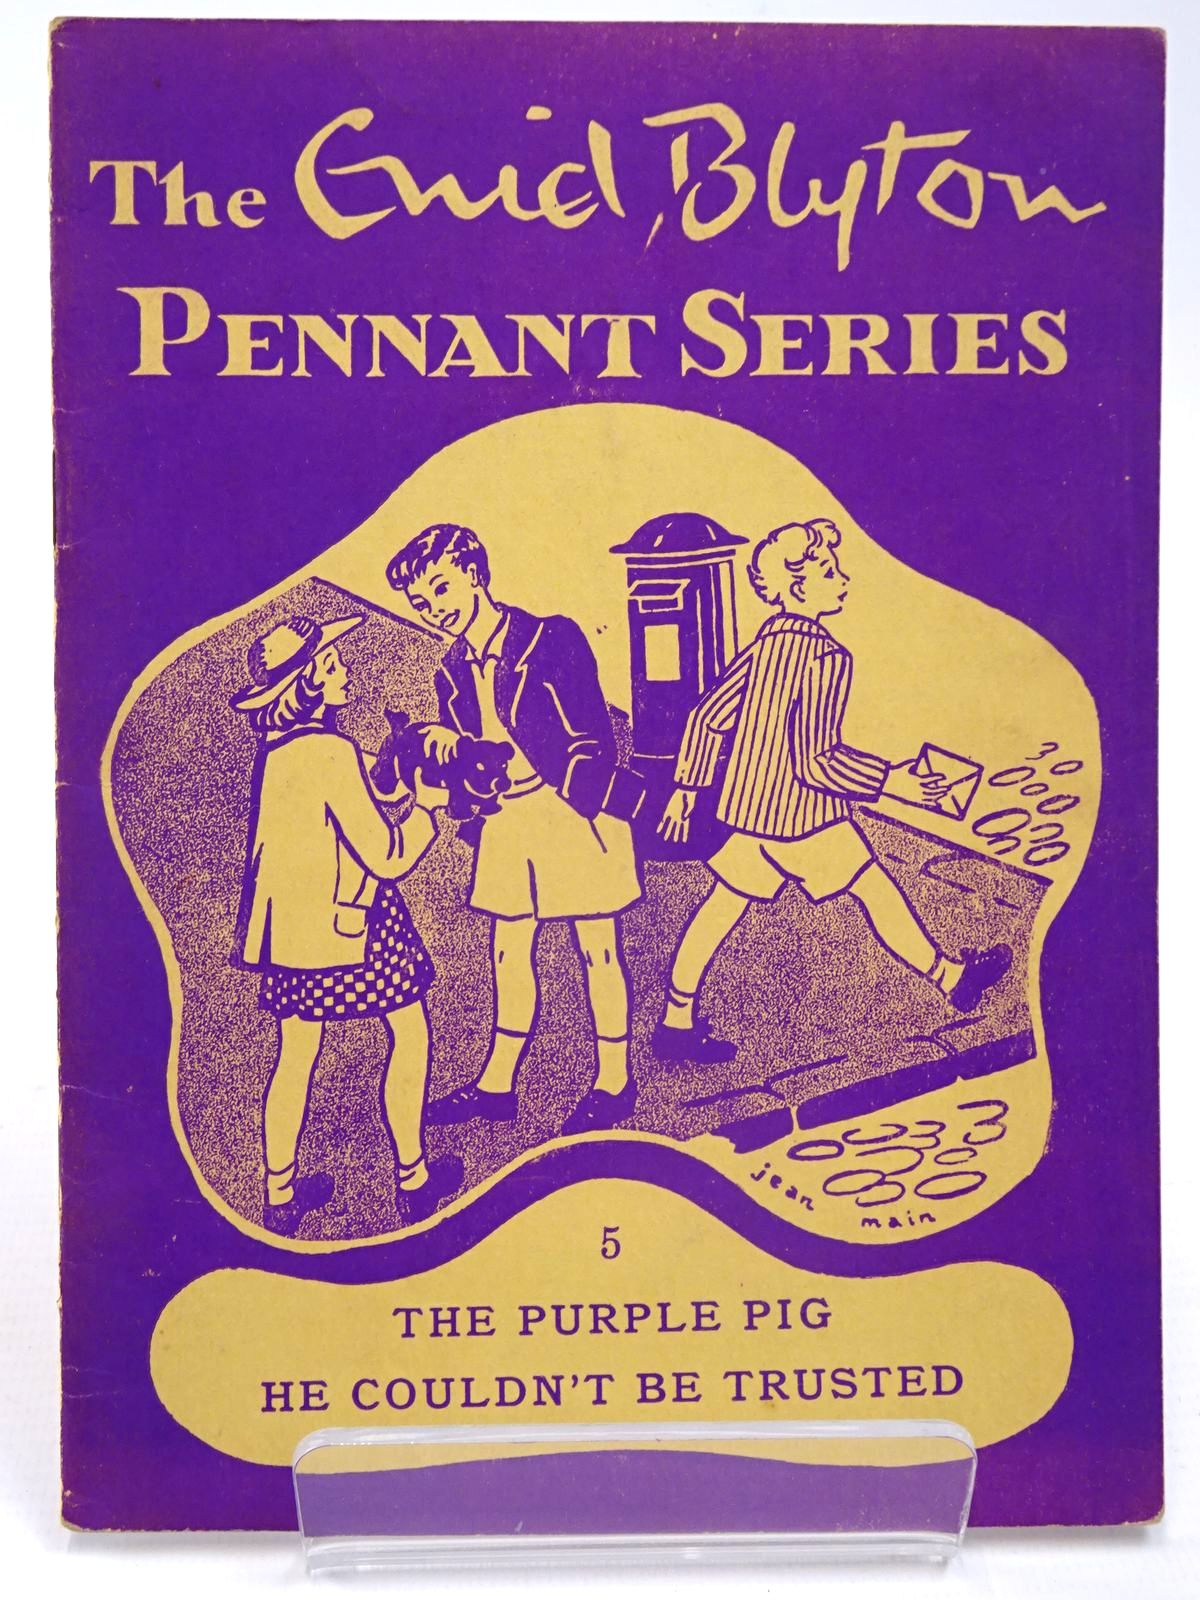 Photo of THE ENID BLYTON PENNANT SERIES No. 5 THE PURPLE PIG / HE COULDN'T BE TRUSTED written by Blyton, Enid illustrated by Main, Jean published by Macmillan & Co. Ltd. (STOCK CODE: 2130523)  for sale by Stella & Rose's Books